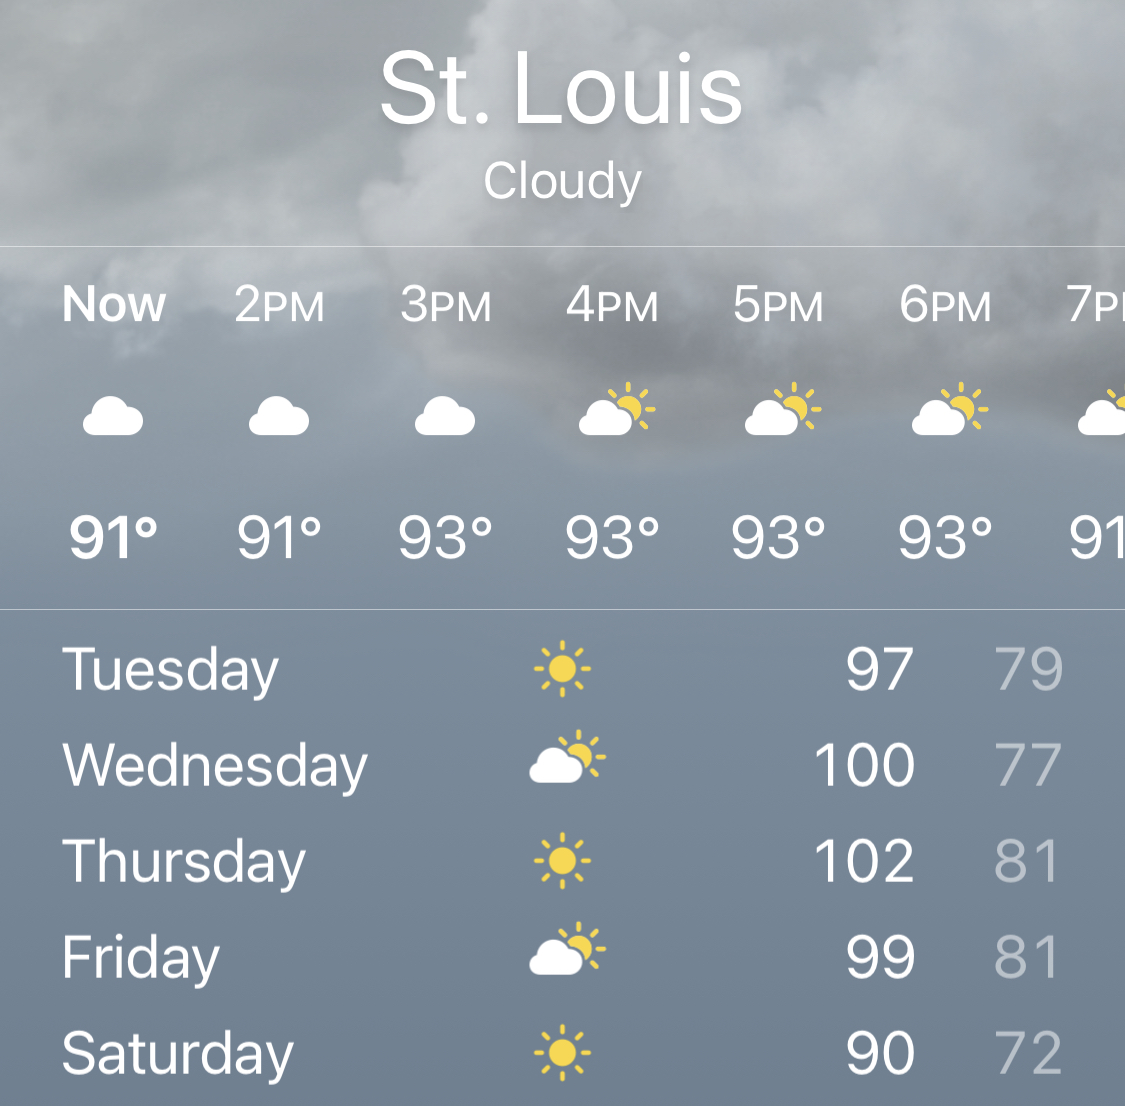 As St. Louis enters a week of excessive heat, it’s important to note that this isn’t simply a heatwave. We see 11 more 90 degree days a year today than when I was born. The climate crisis is here and it will only get worse if we don’t act.